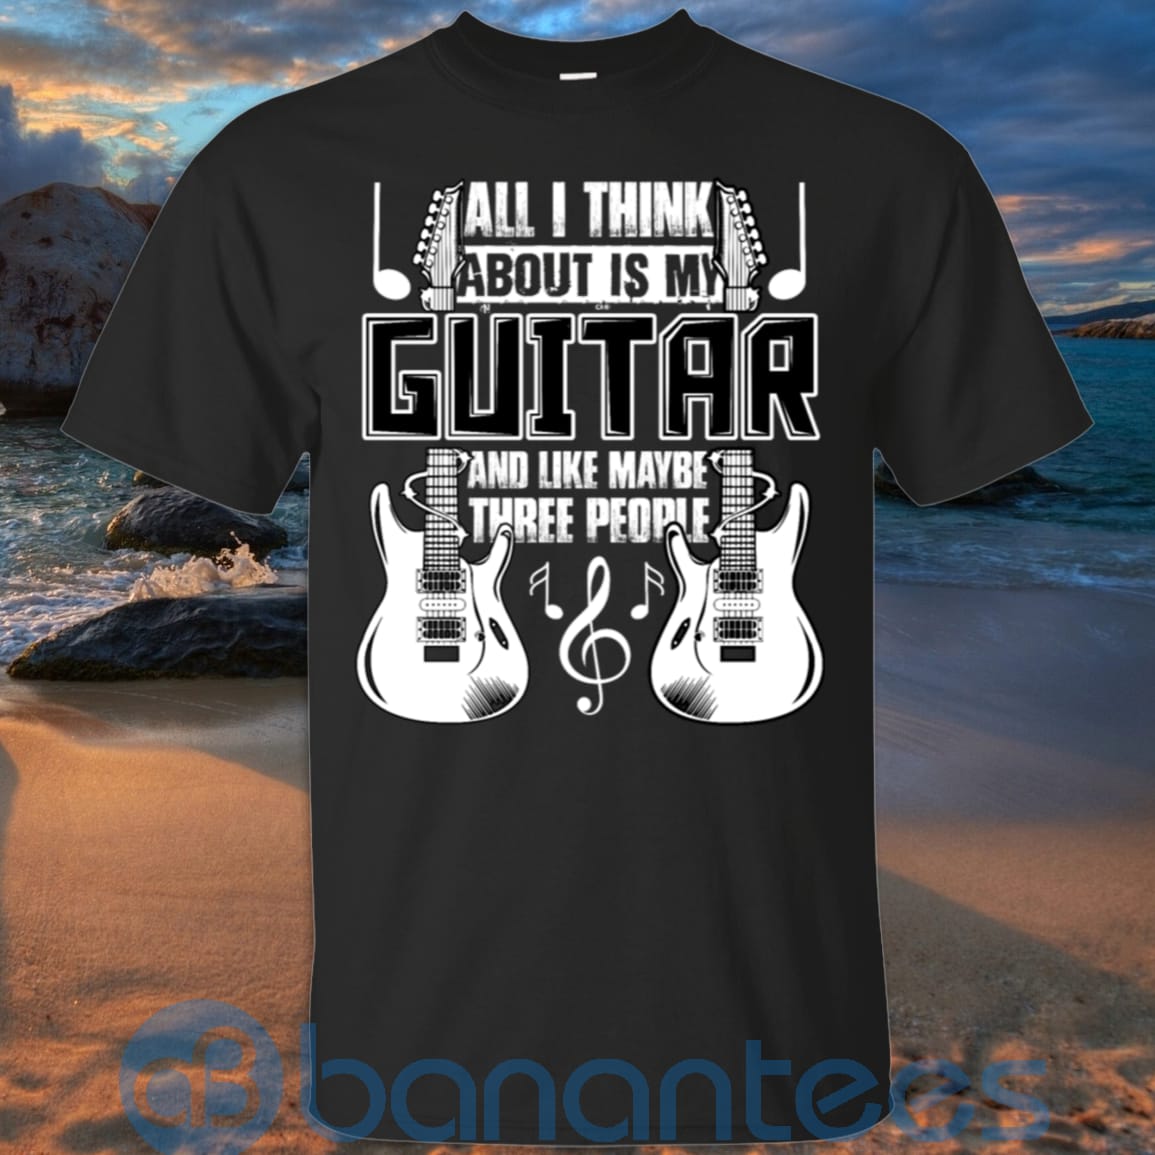 All I Think About Is My Guitar And Like Maybe There People T-Shirt Hoodie Sweatshirt